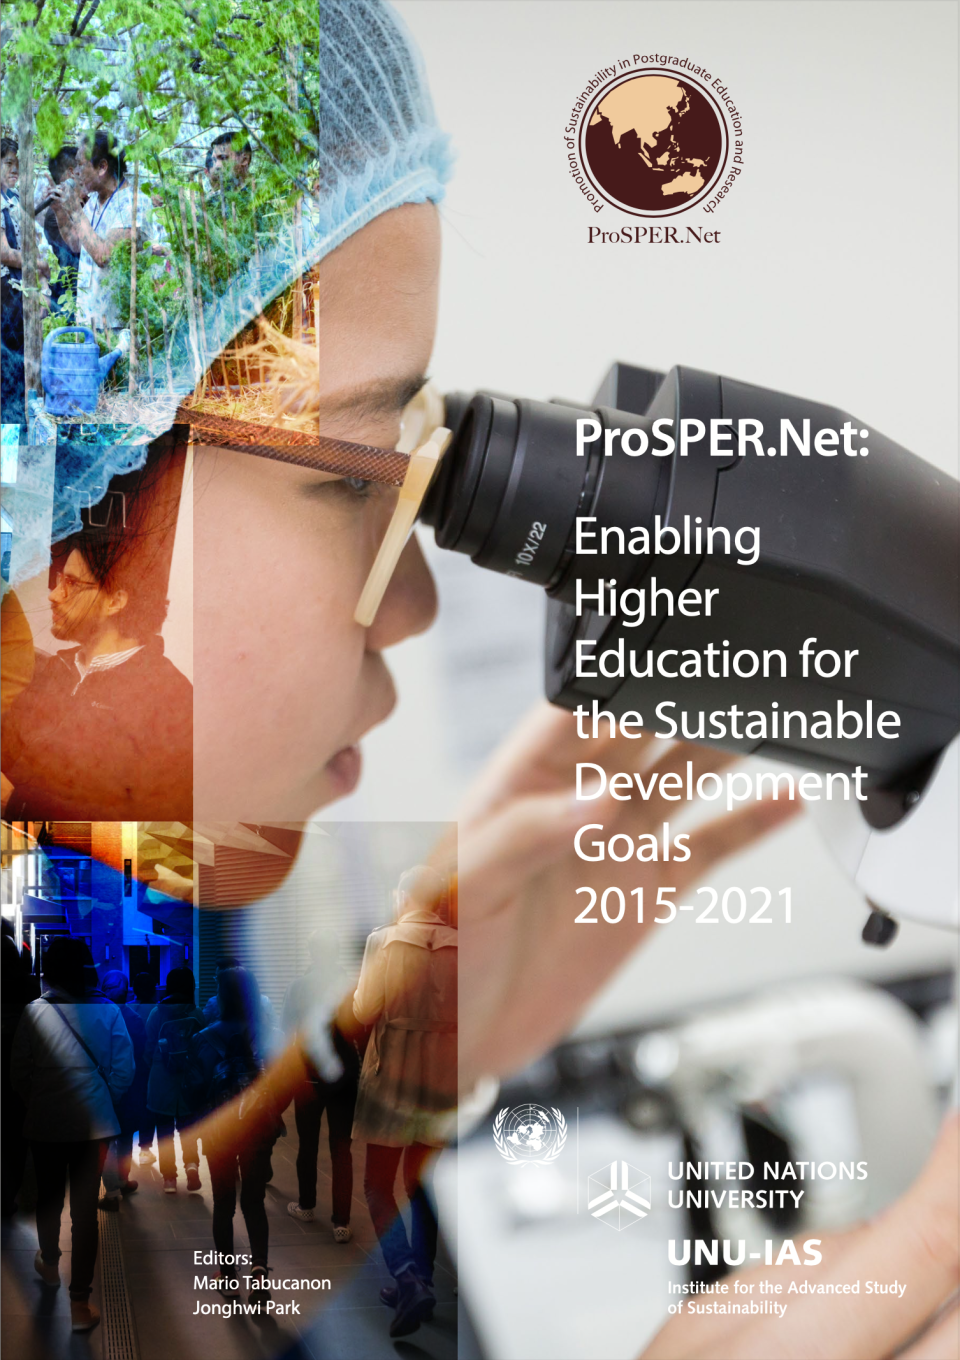 Cover image of the publication "Enabling Higher Education for the SDGs, 2015–2021"